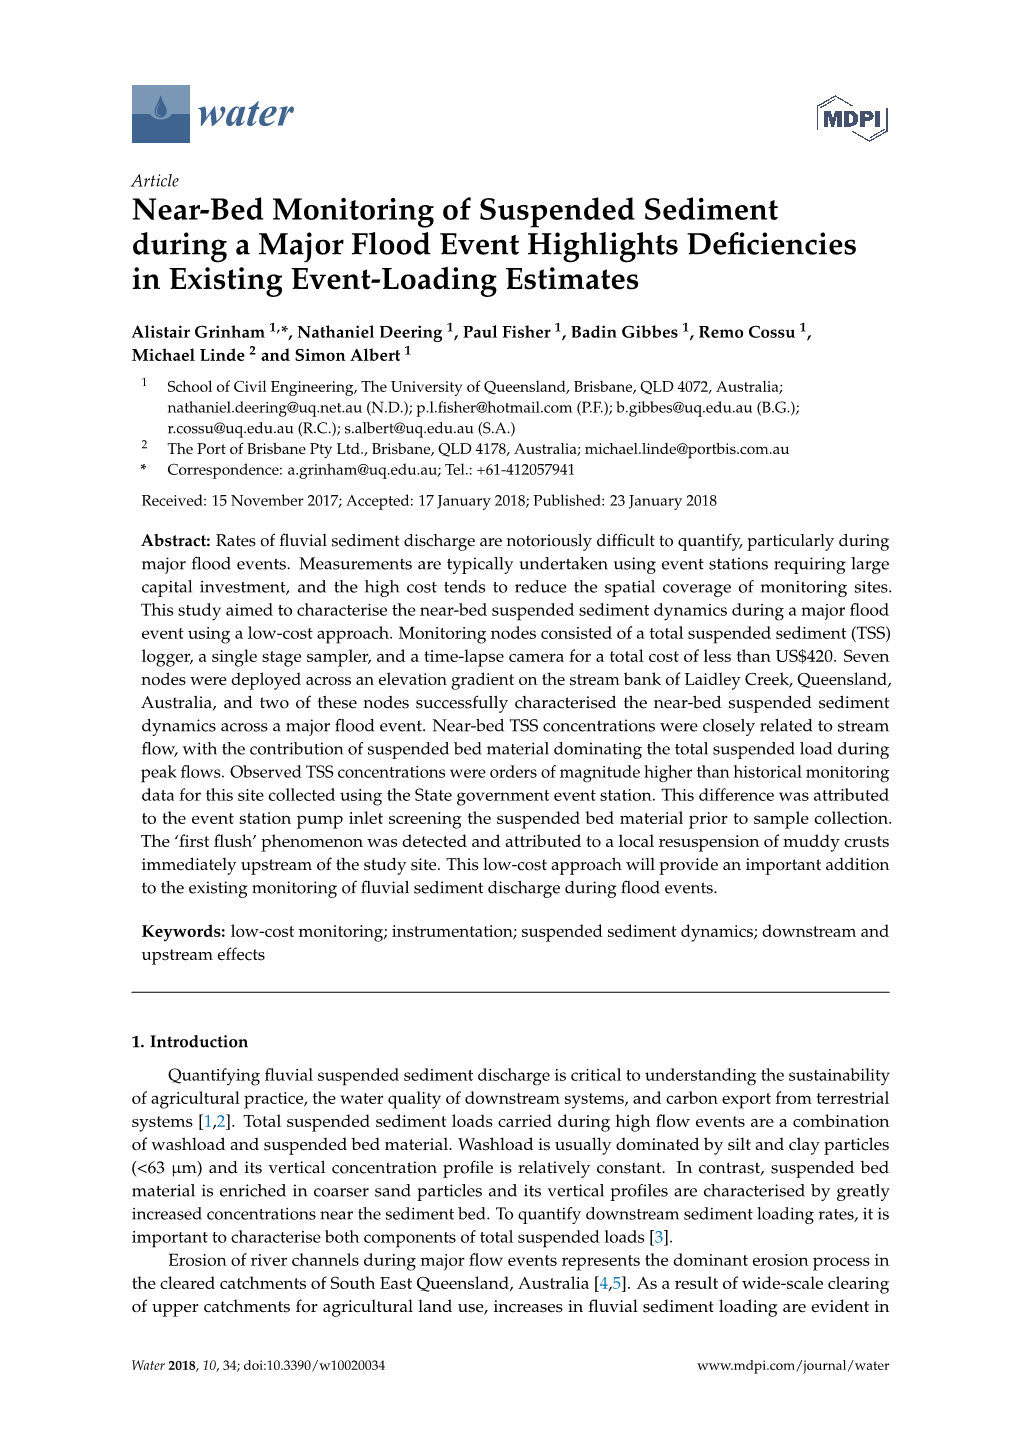 Near-Bed Monitoring of Suspended Sediment During a Major Flood Event Highlights Deﬁciencies in Existing Event-Loading Estimates